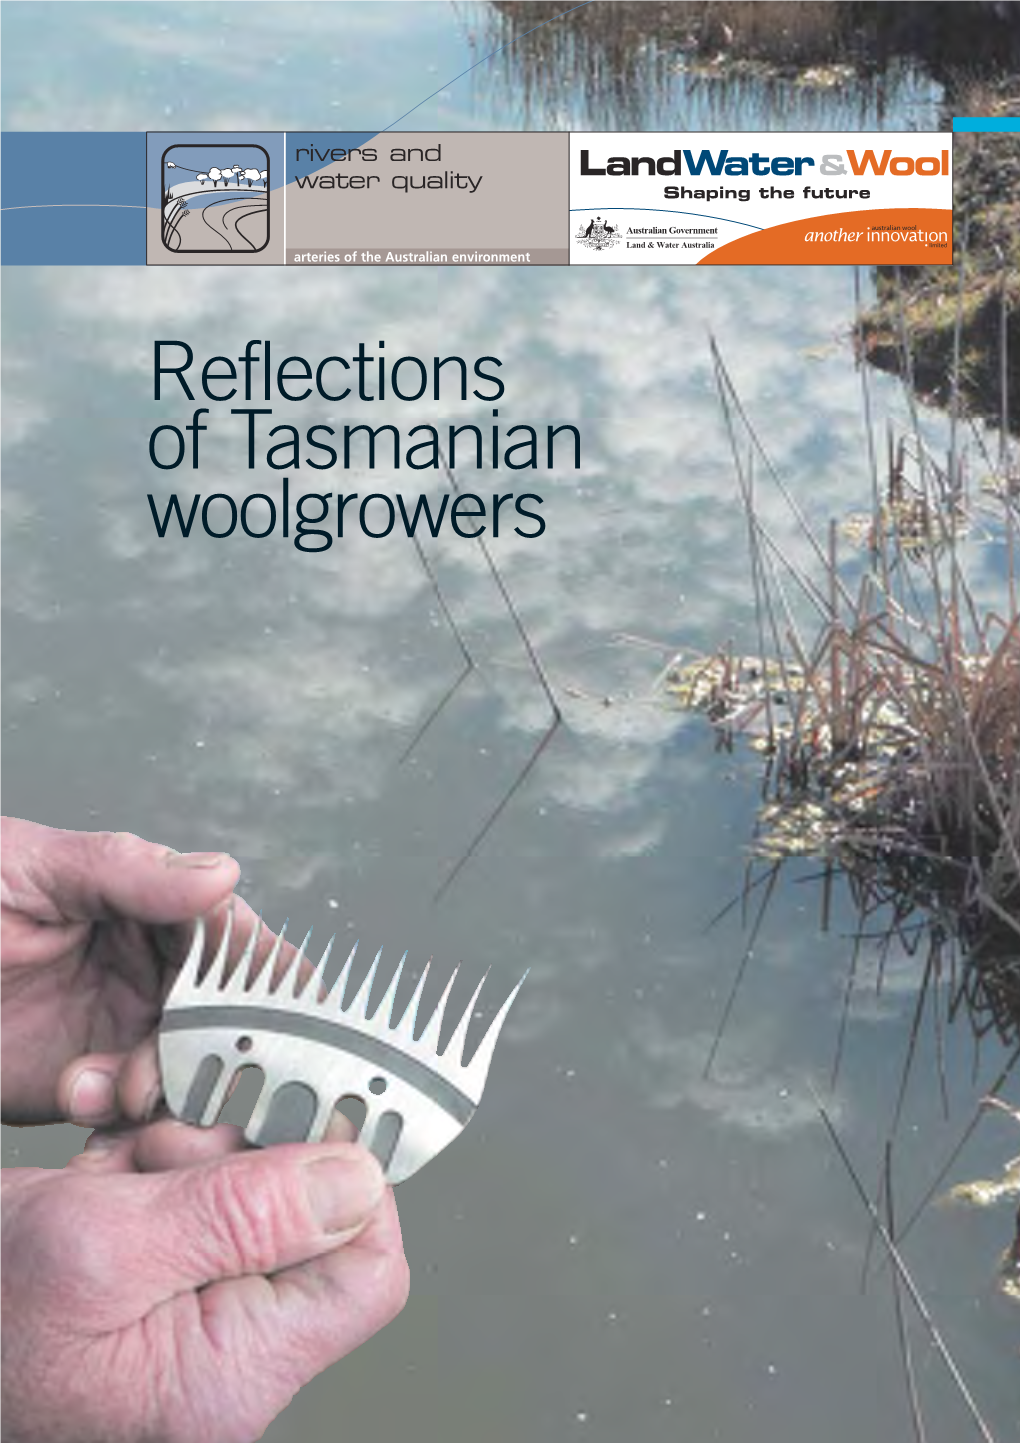 Reflections of Tasmanian Woolgrowers RIVERS and WATER QUALITY